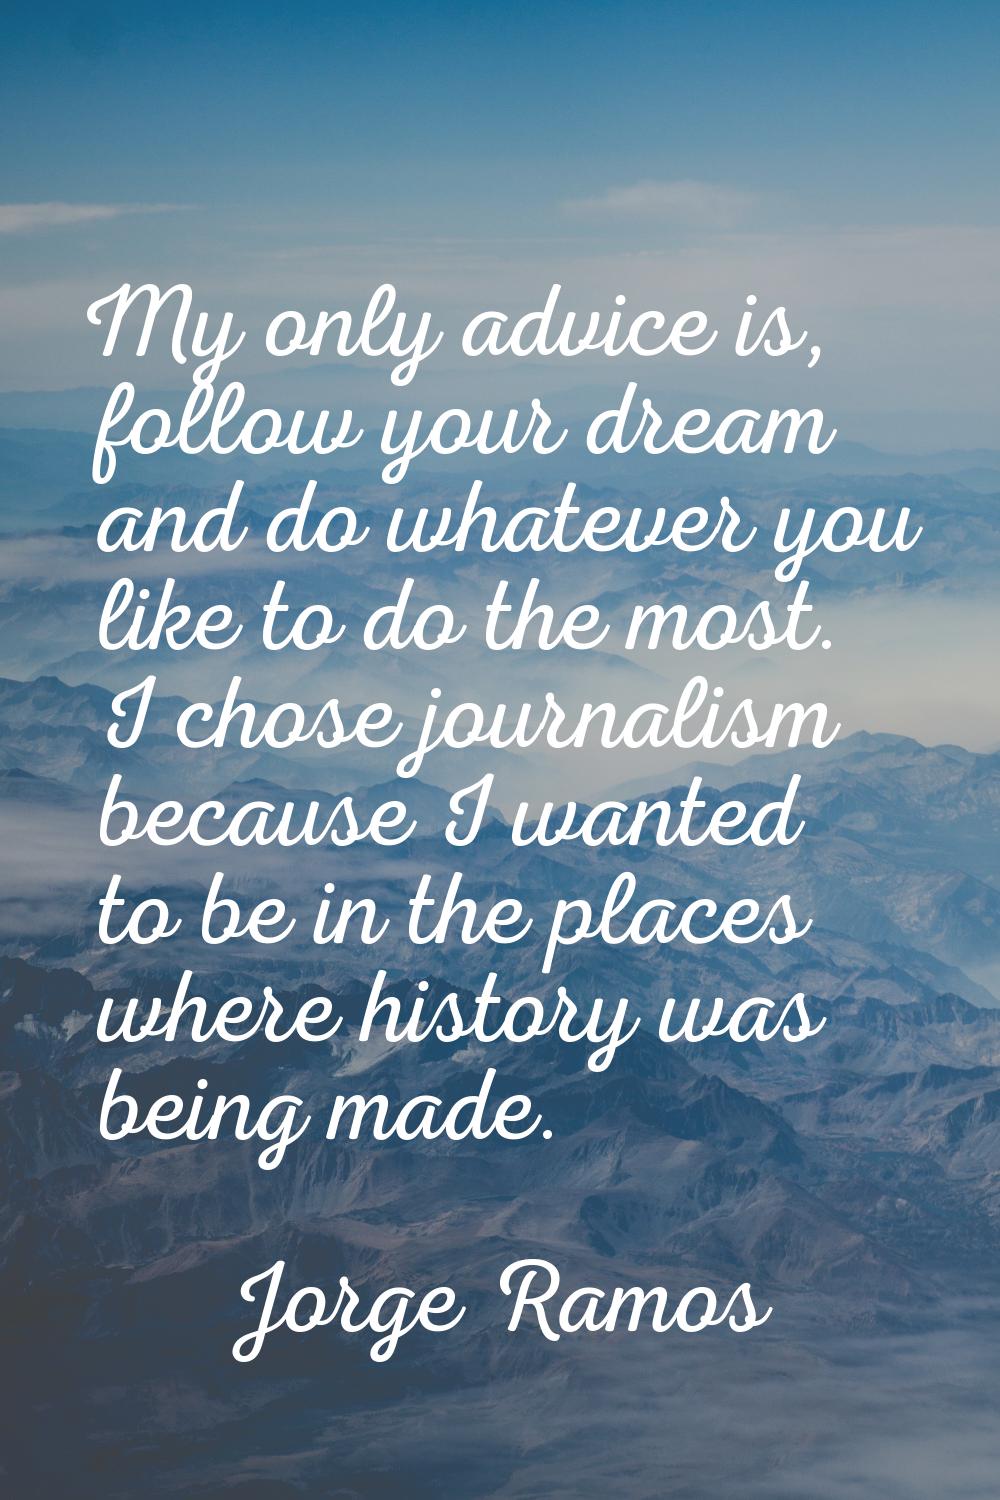 My only advice is, follow your dream and do whatever you like to do the most. I chose journalism be